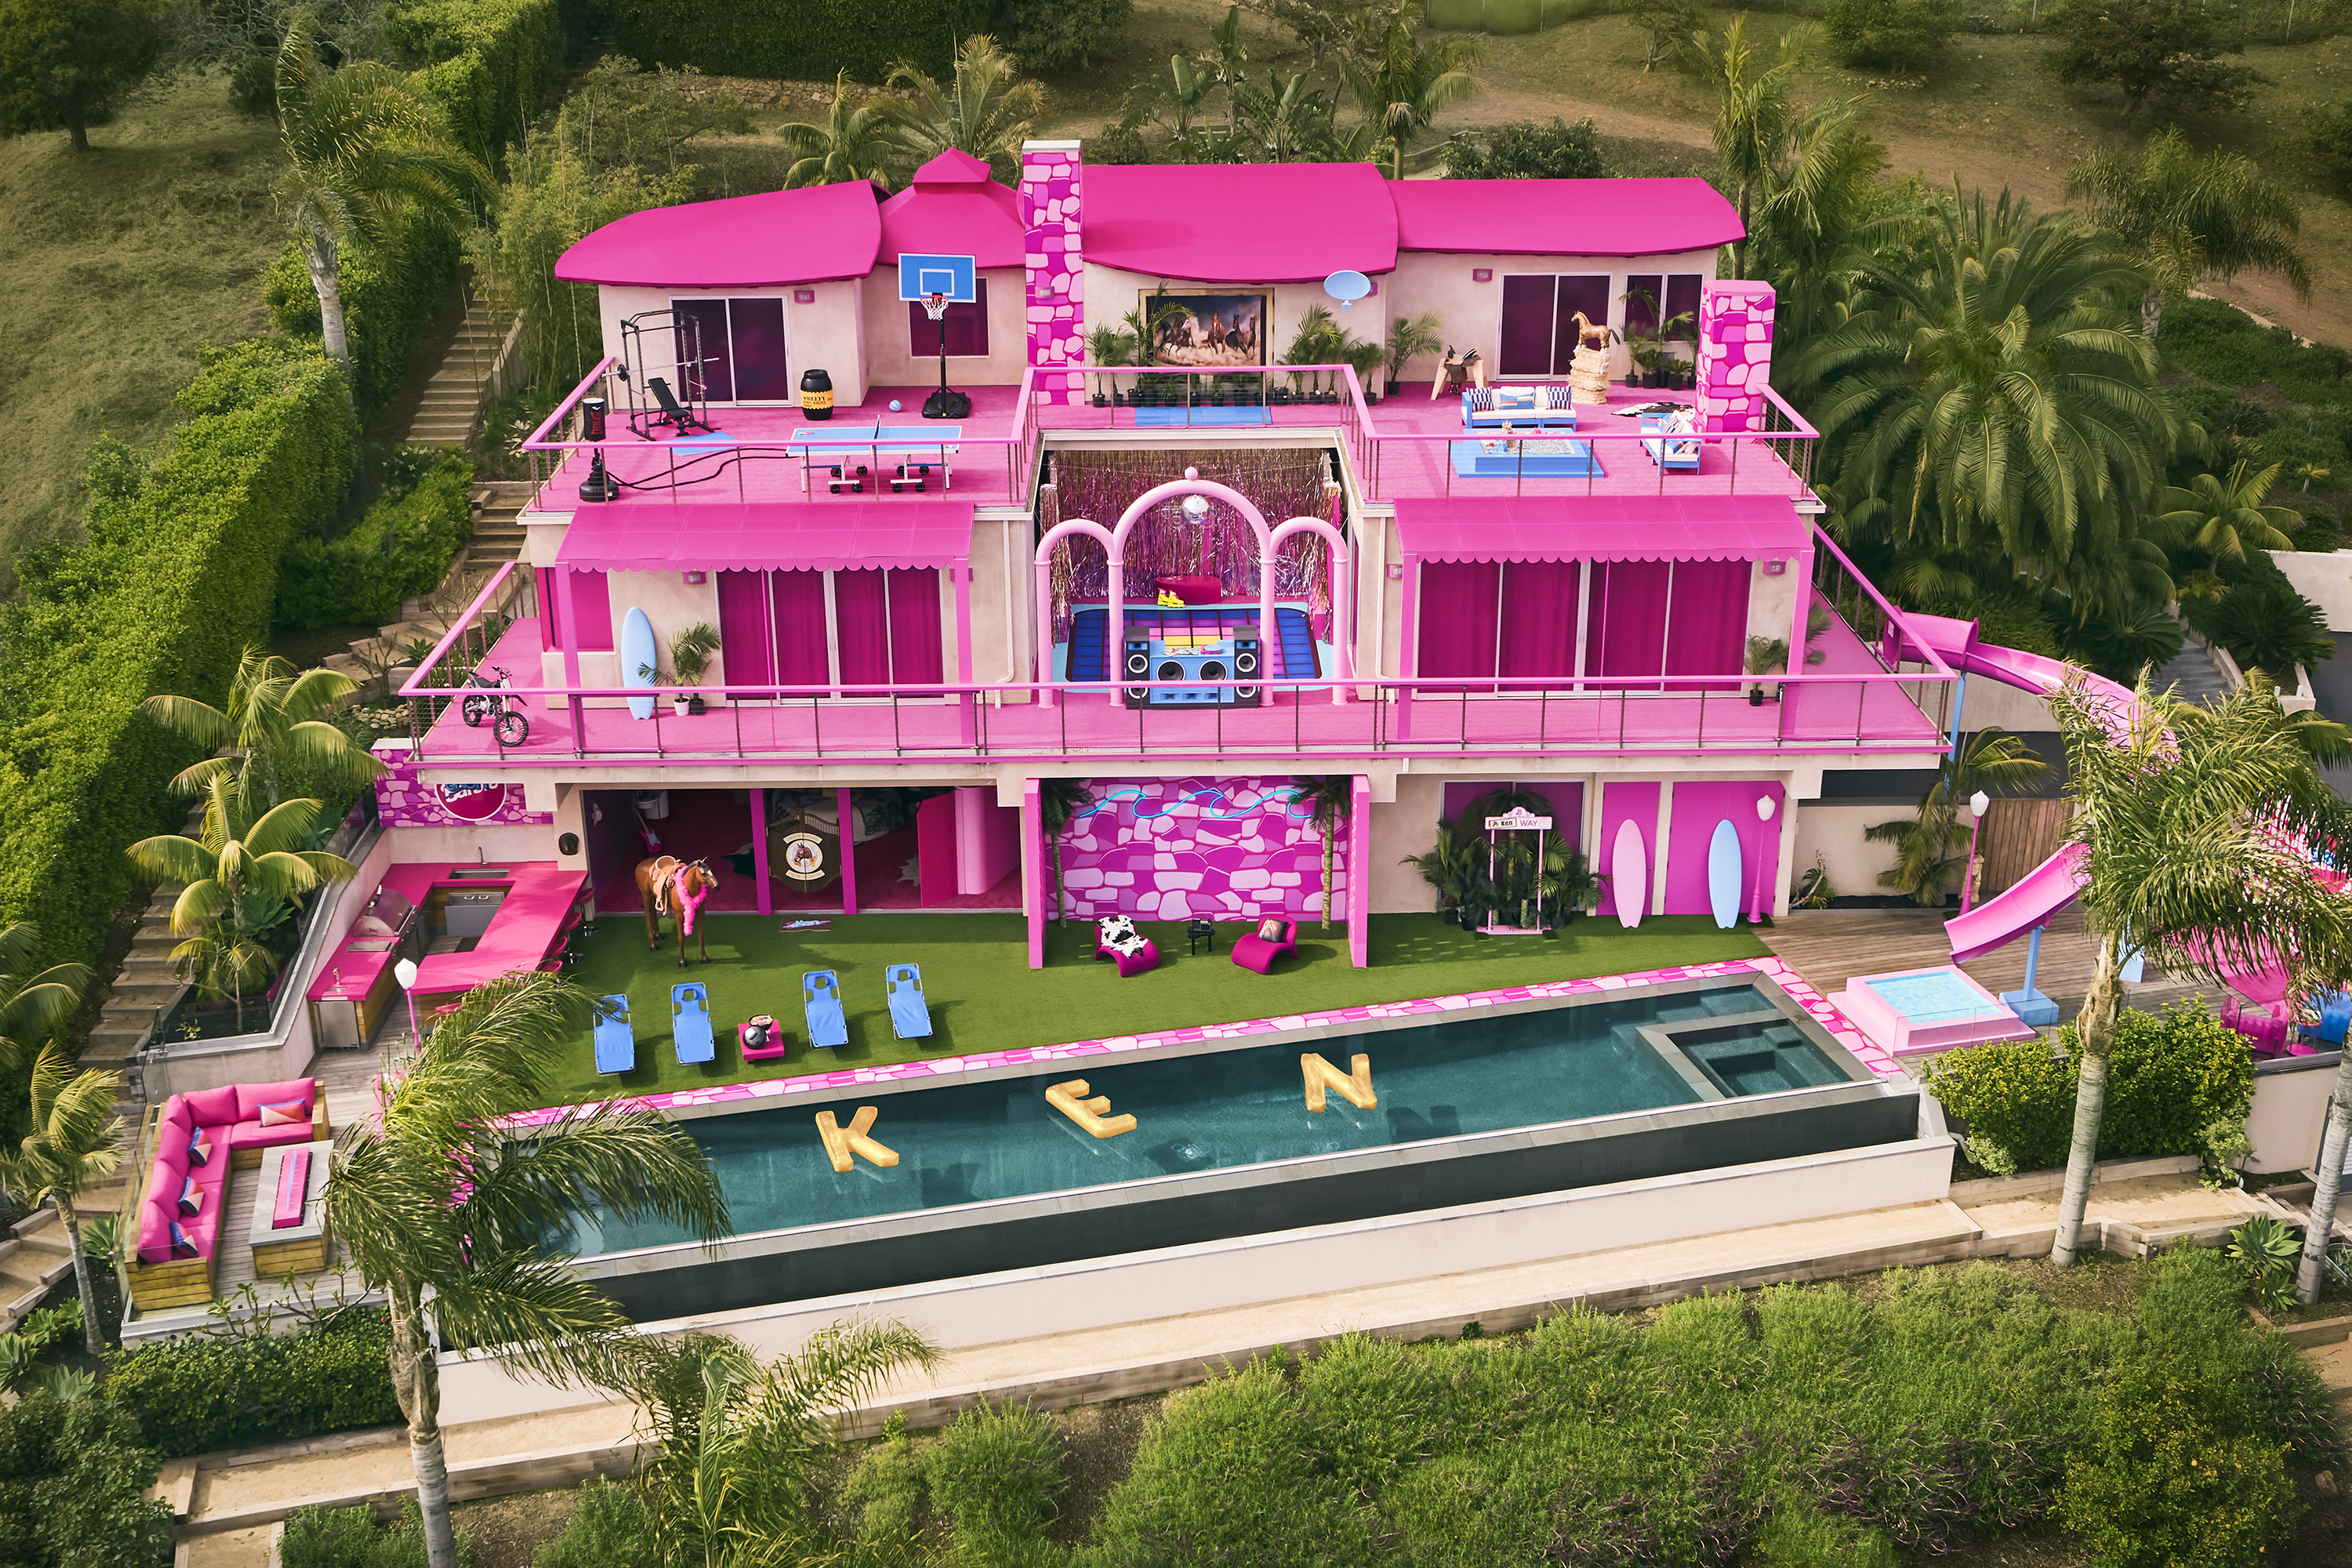 Barbie House with Doll